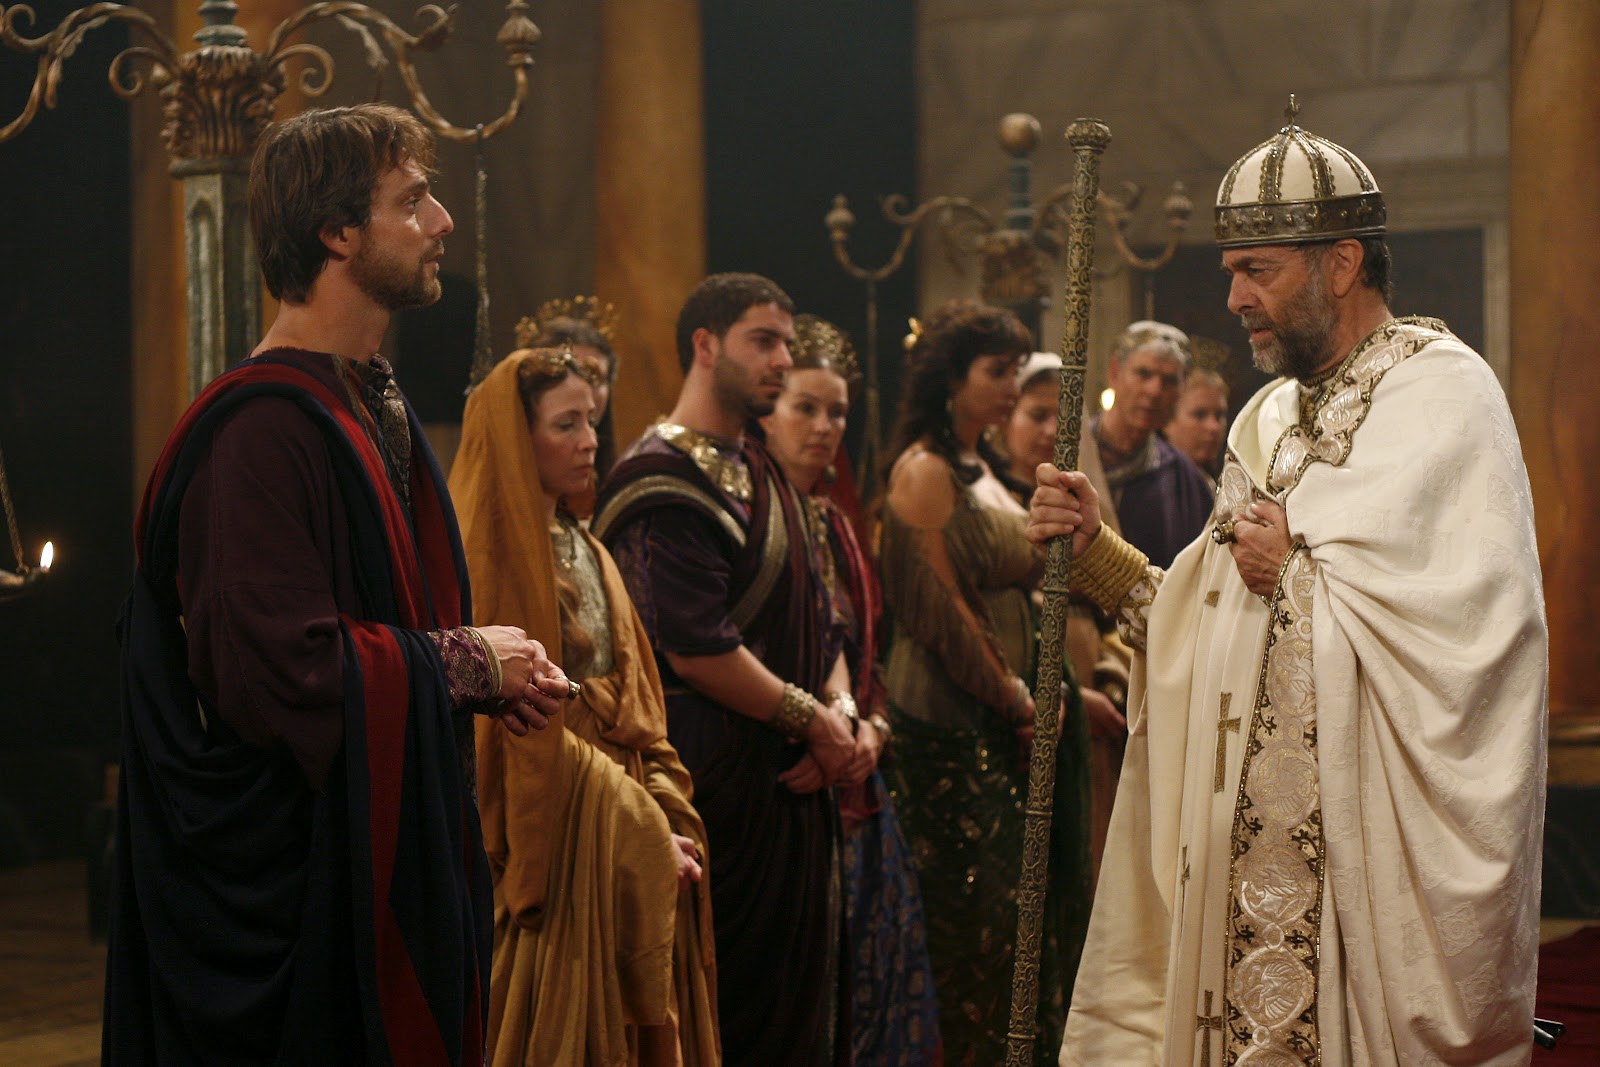 Catholic Books And Movies: St. Augustine premiers on the big screen